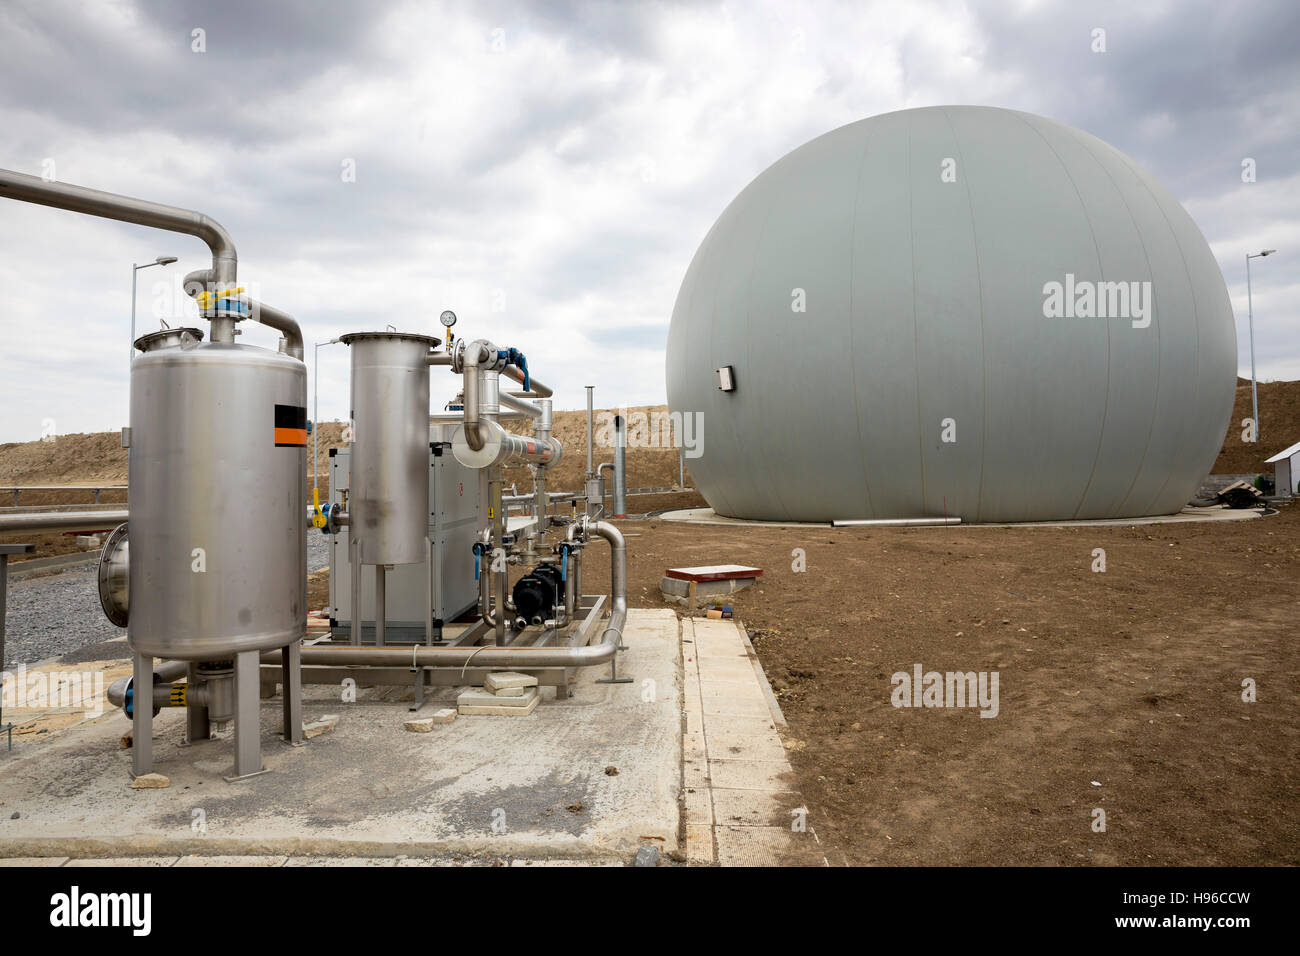 Natural gas tank. Oil and gas processing plant with pipes. LPG gas industrial storage sphere tank. Natural gas is a naturally occurring hydrocarbon ga Stock Photo